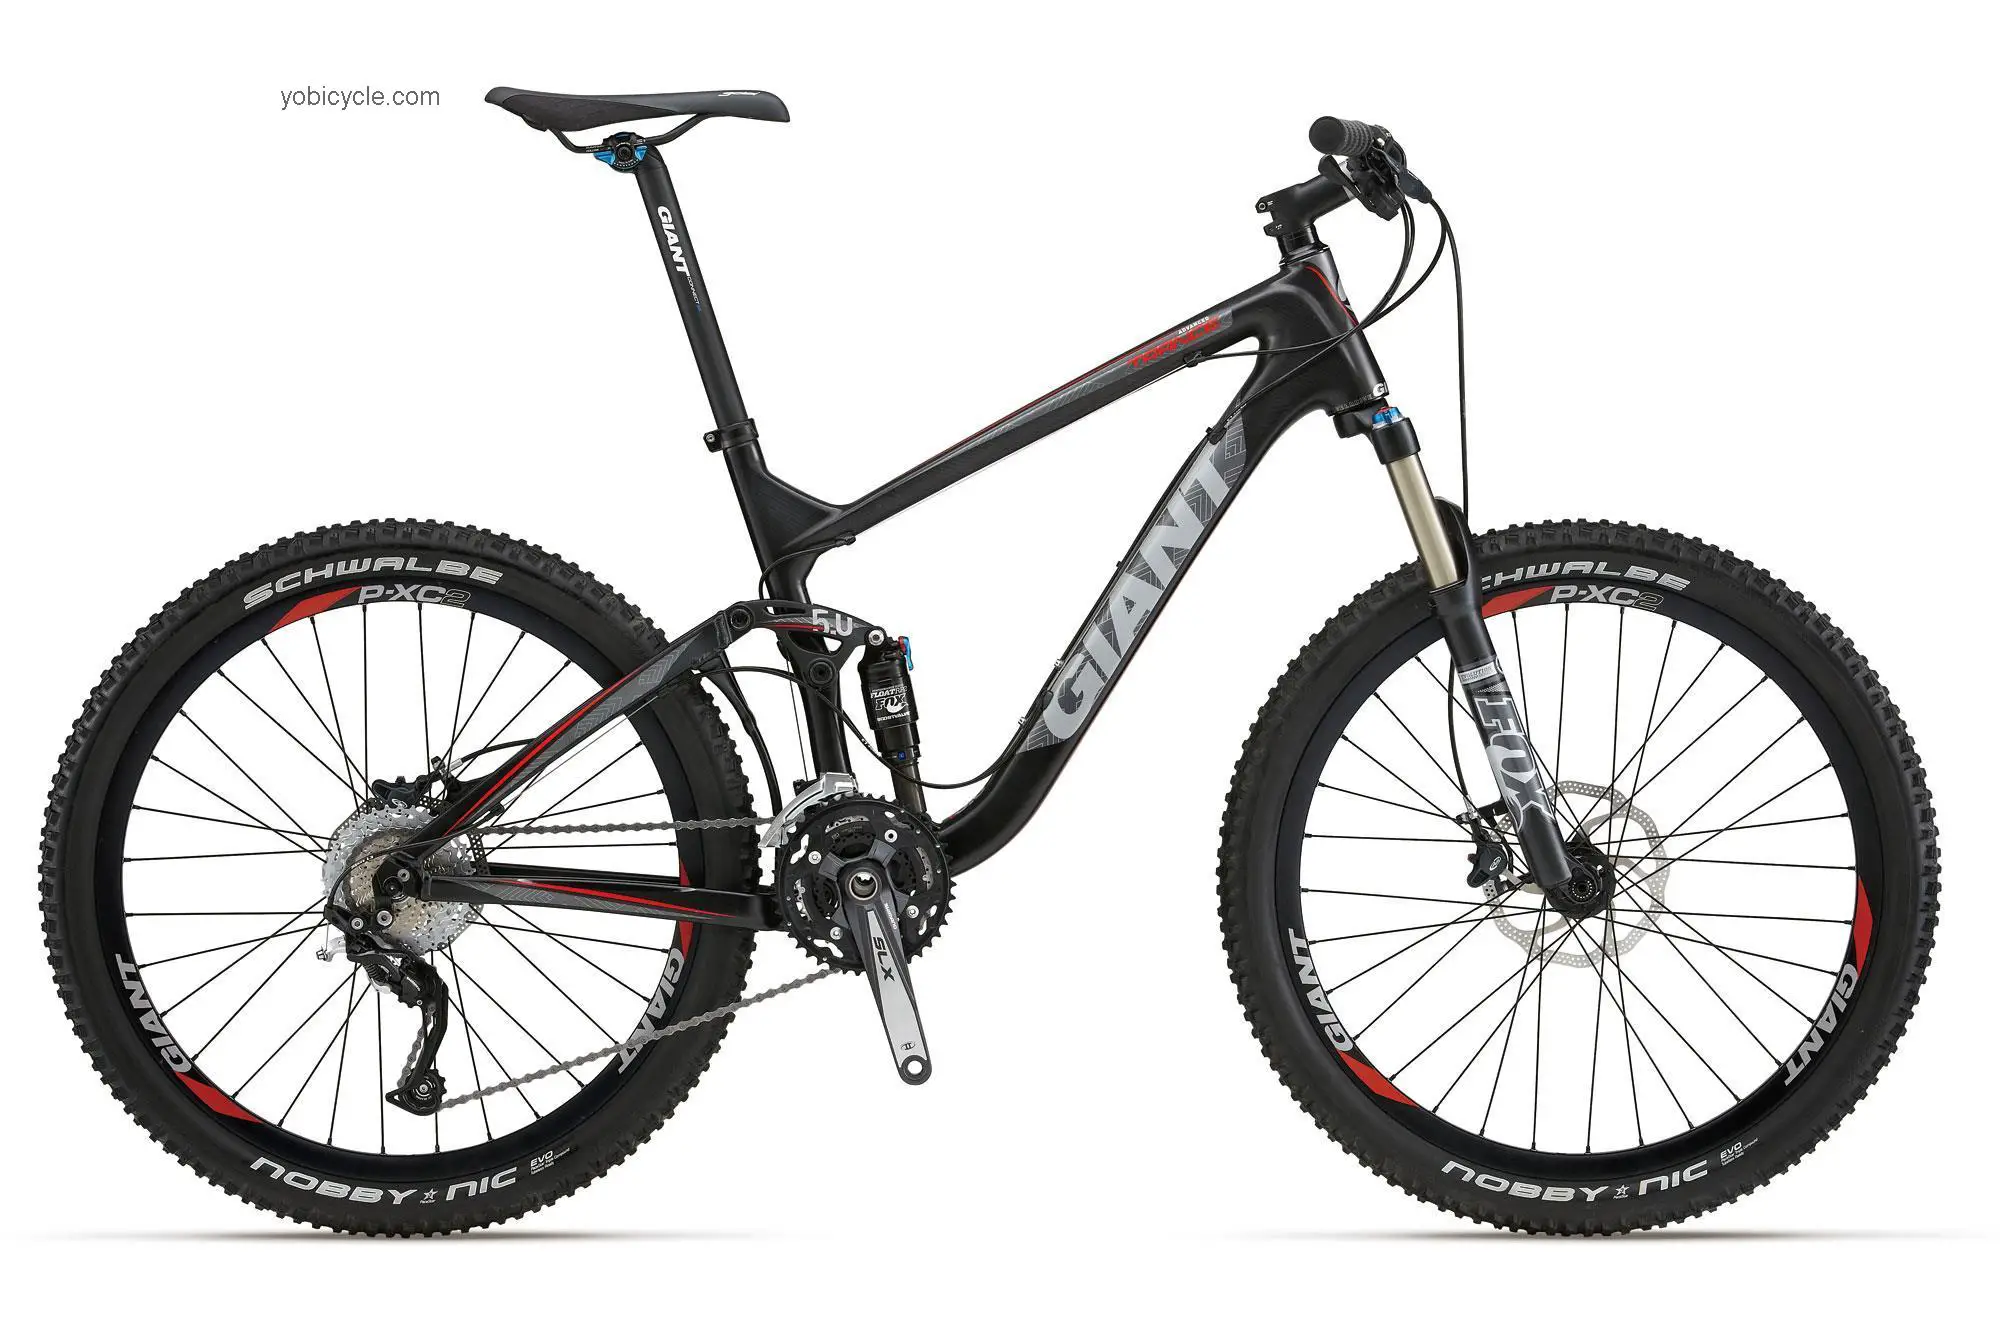 Giant Trance X Advanced 2 2012 comparison online with competitors